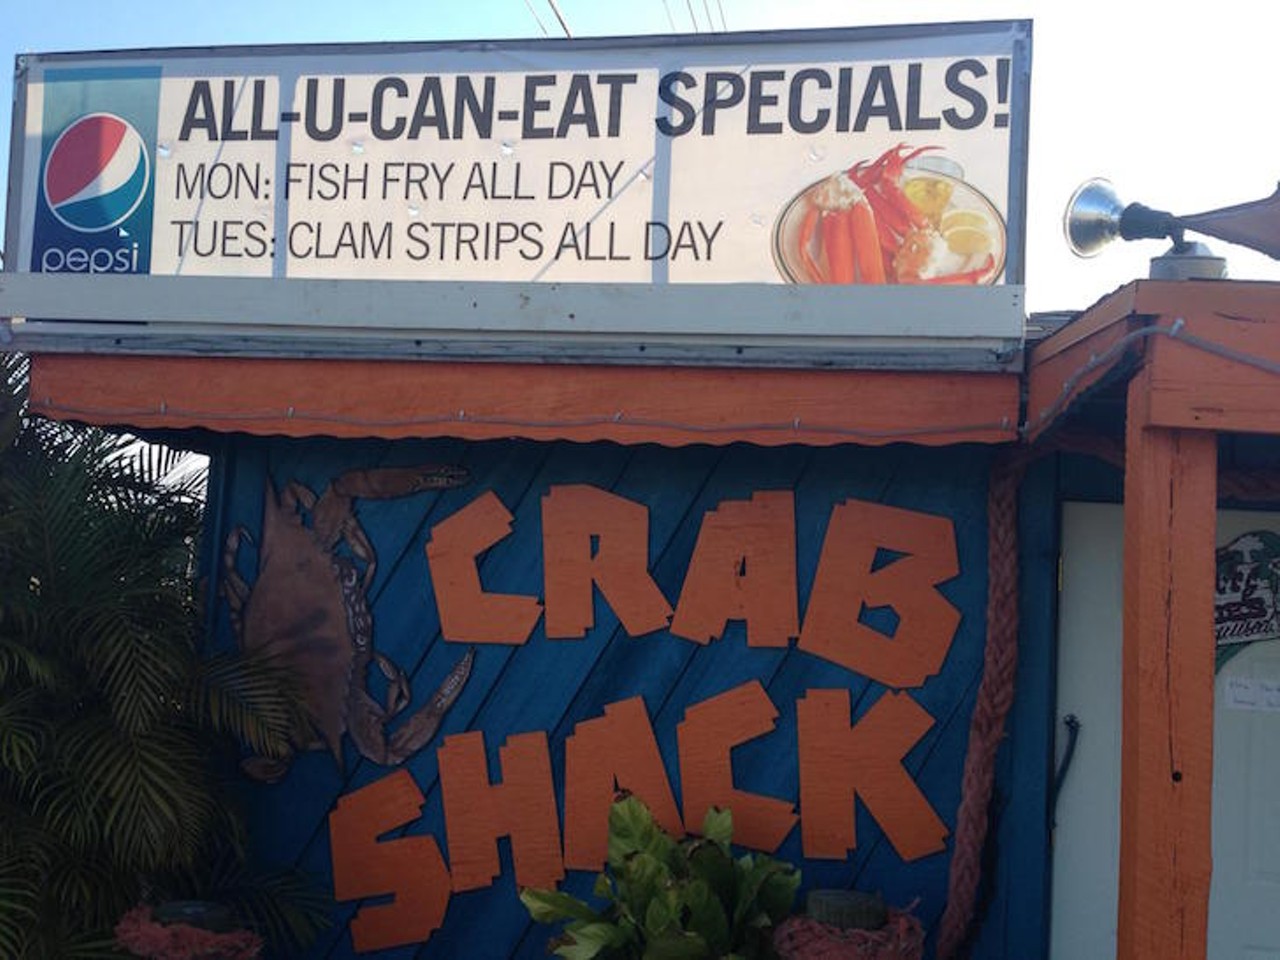 Crab Shack    
11400 Gandy Blvd St. Petersburg, Florida, (727) 576-7813 
Crab Shack warns its customers that their food might take a little longer than they want, but that&#146;s only because every dish is made fresh to order. Now that&#146;s worth waiting for. This no-frills, Florida style seafood joint has a huge menu chock full of any seafood dish you can think of, and then some. 
Photo via Crab Shack/Facebook